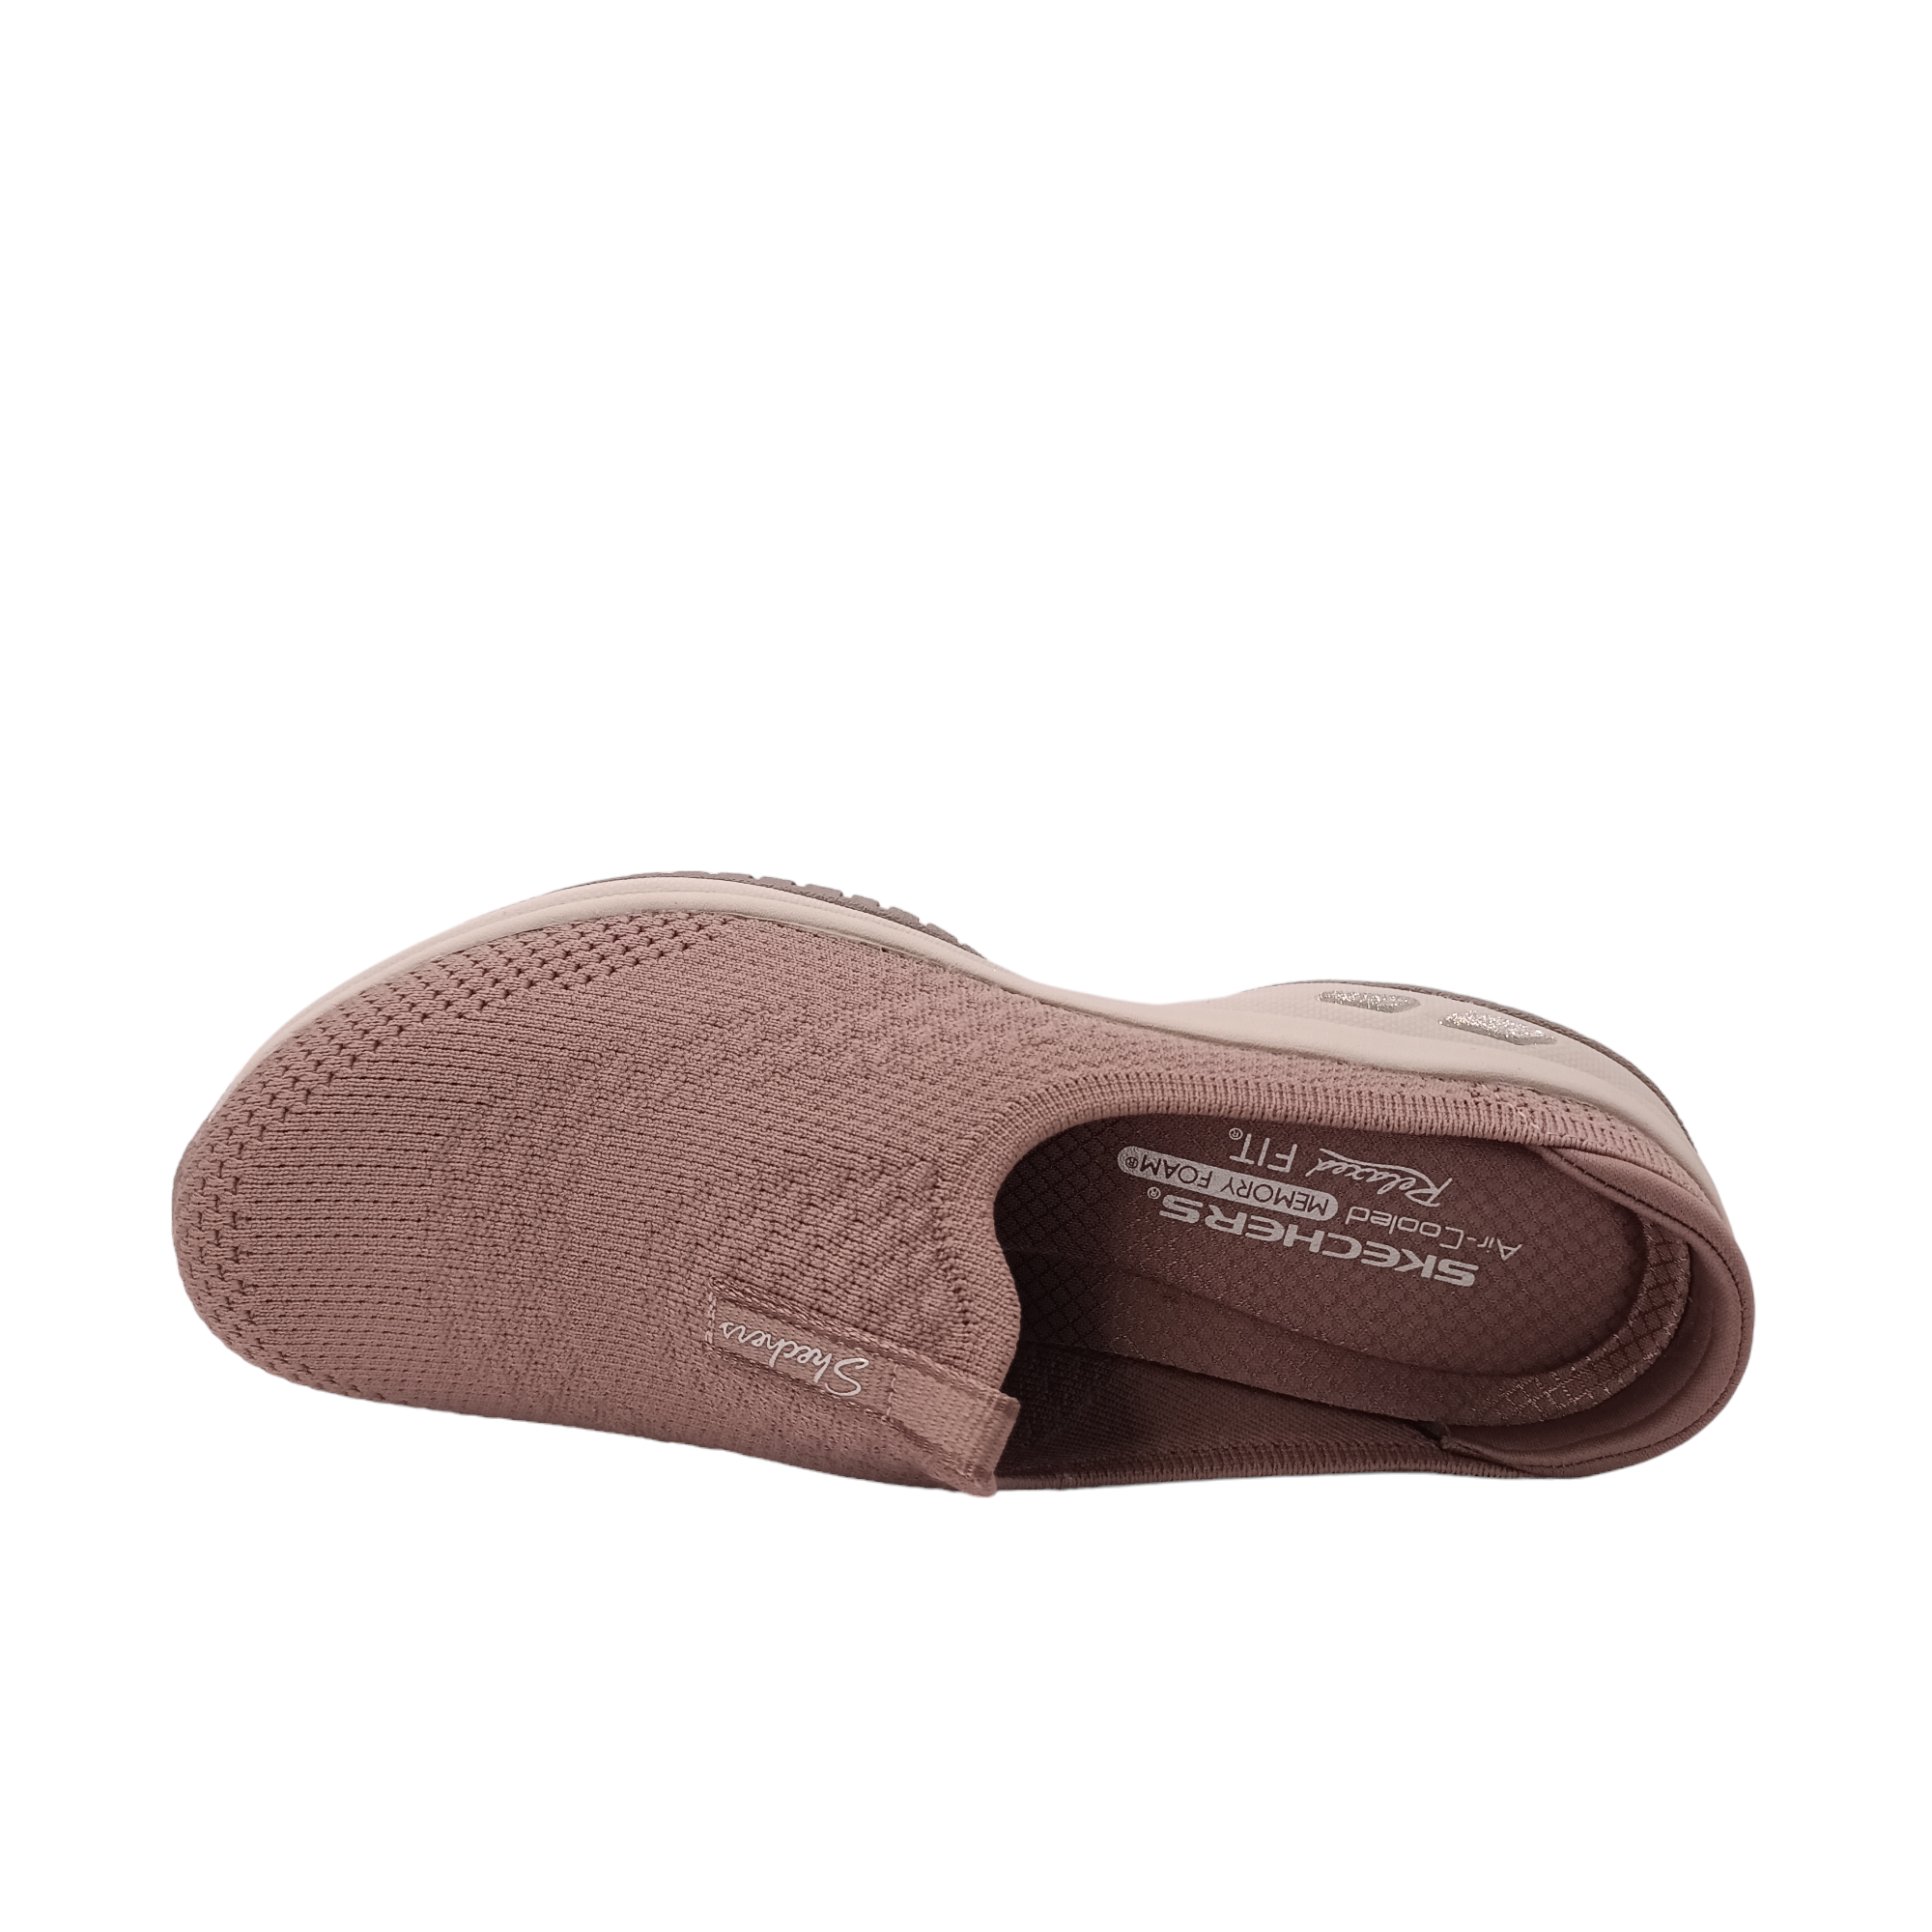 Shop Snuggle Vibes Skechers - with shoe&me - from Skechers - Mules - Slide/Scuff, Winter, Womens - [collection]